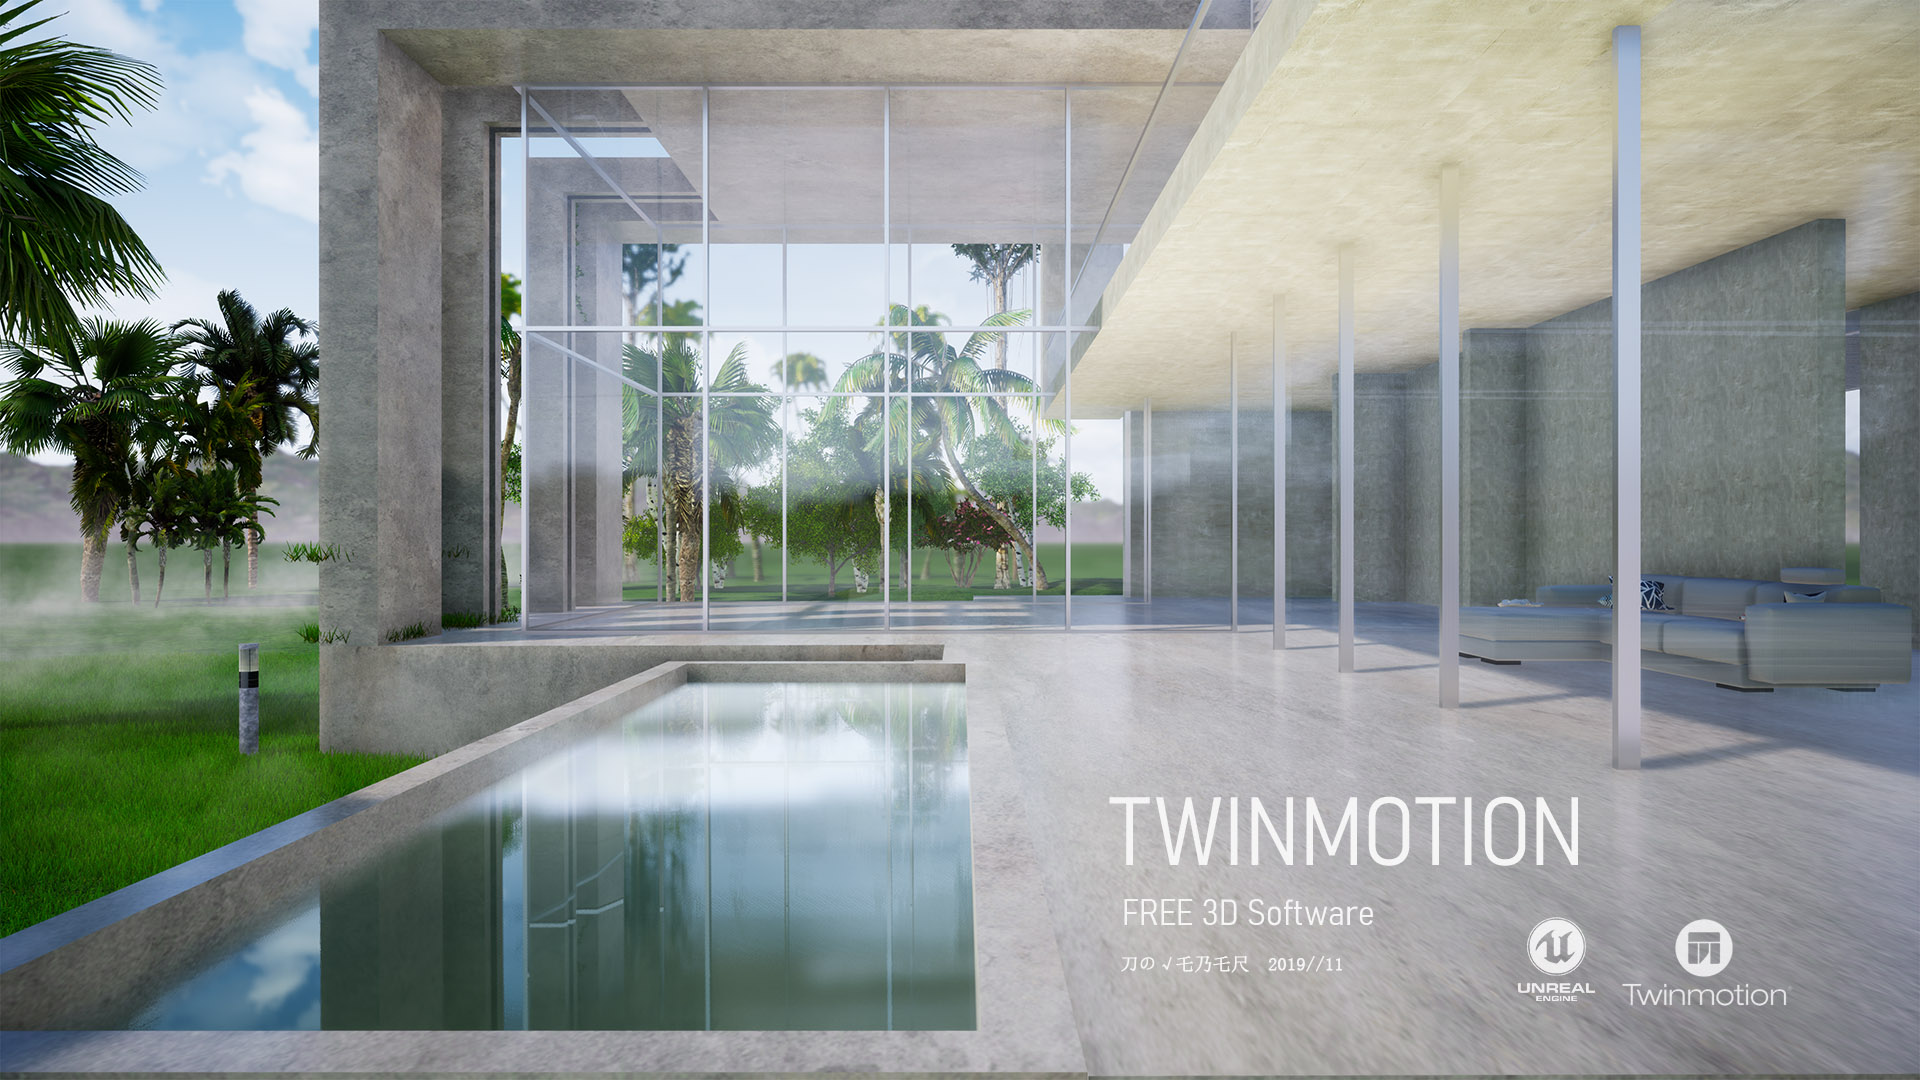 twinmotion free forever